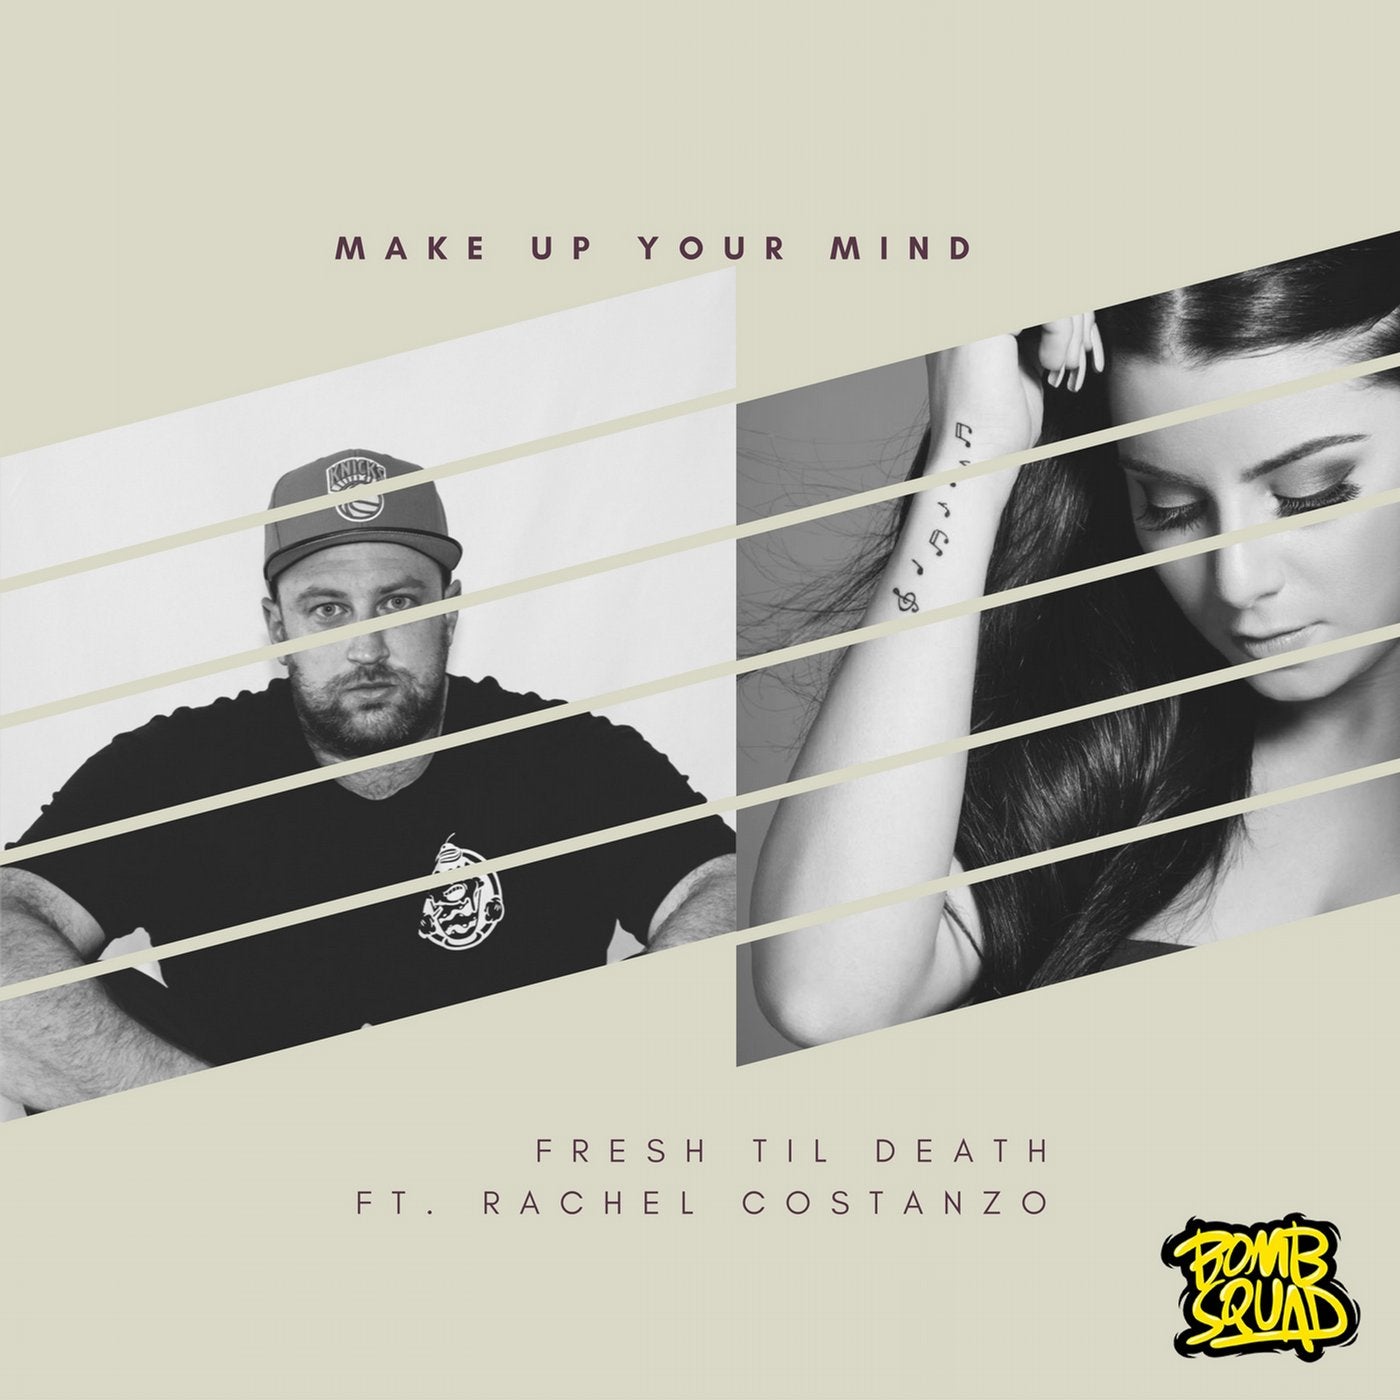 Make up Your Mind (feat. Rachel Costanzo)